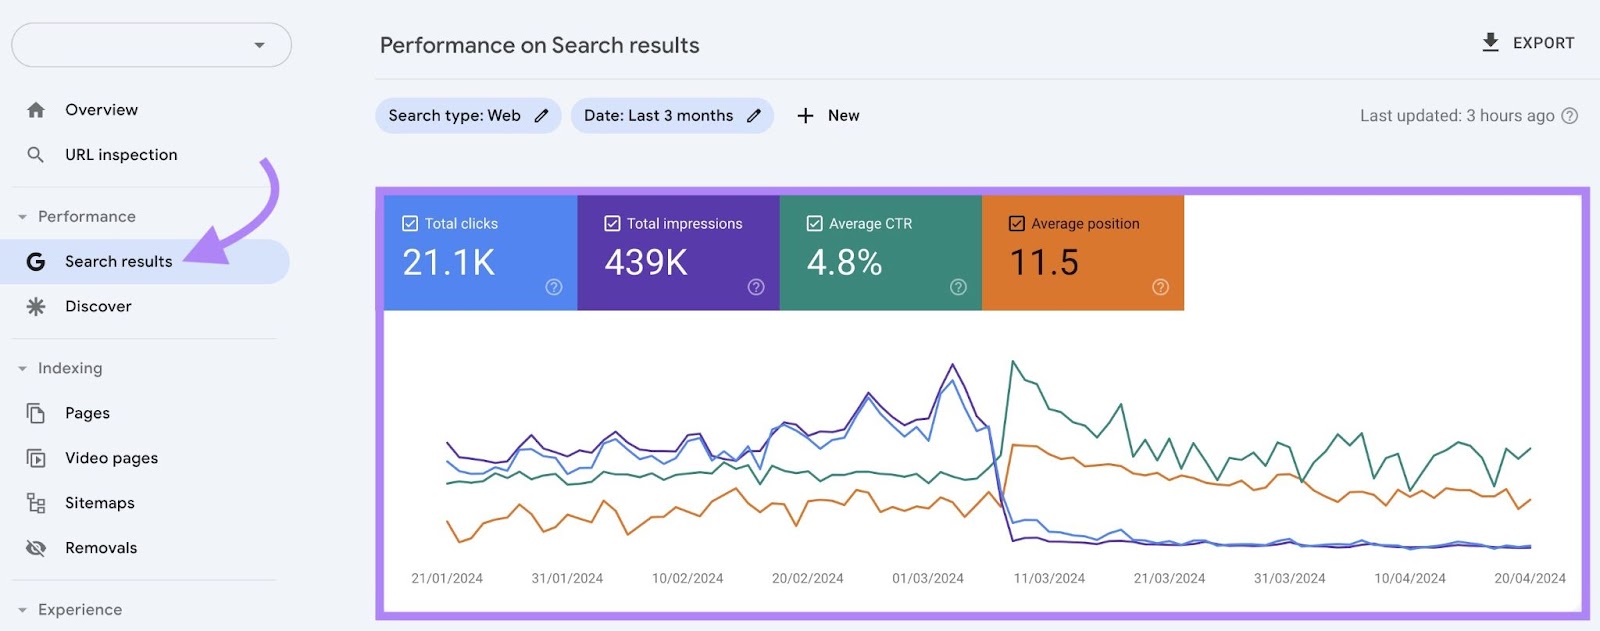 Performance connected  hunt  results study  shows a enactment     illustration  with clicks, impressions, mean  CTR, and mean  presumption   implicit    the past  3  months